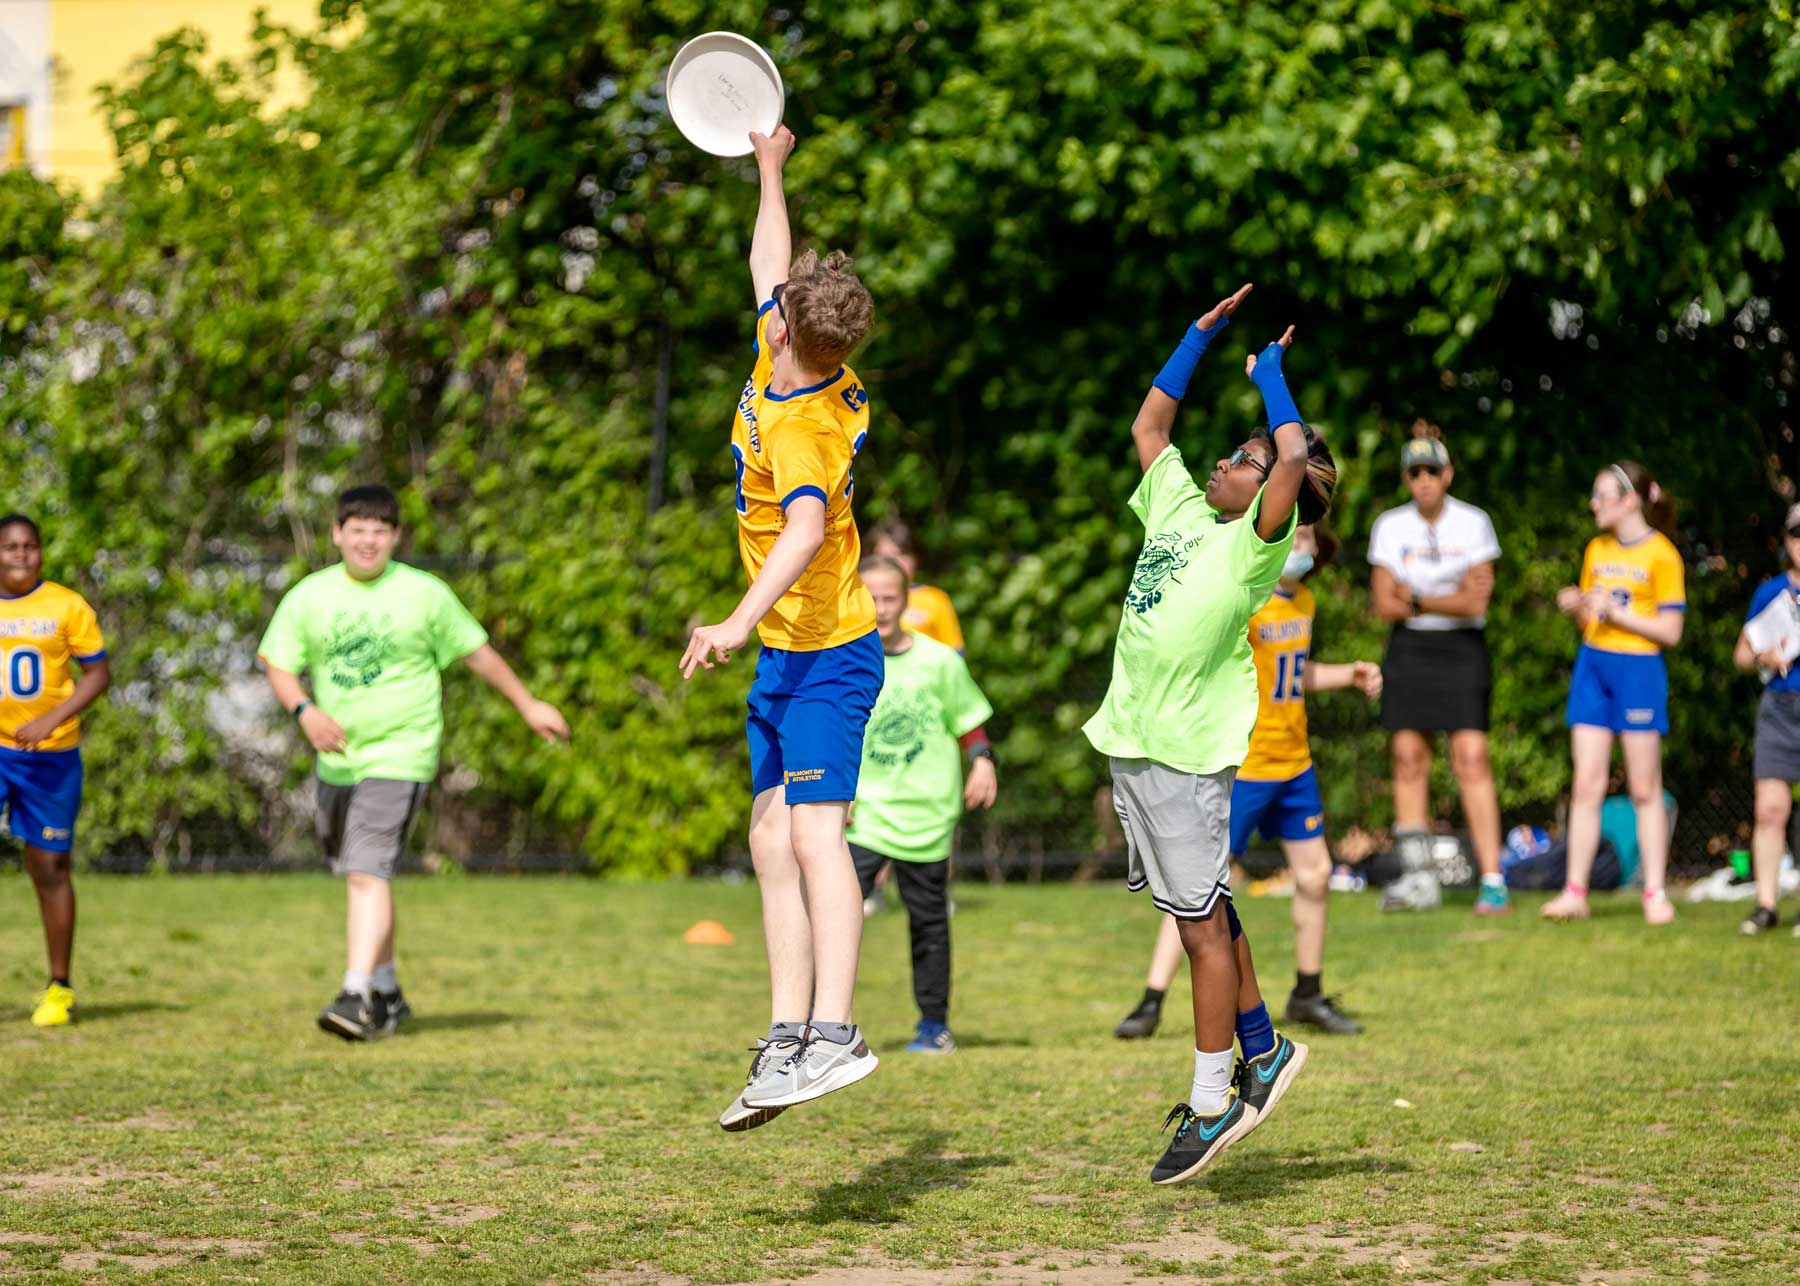 A student in the air catching an ultimate disk